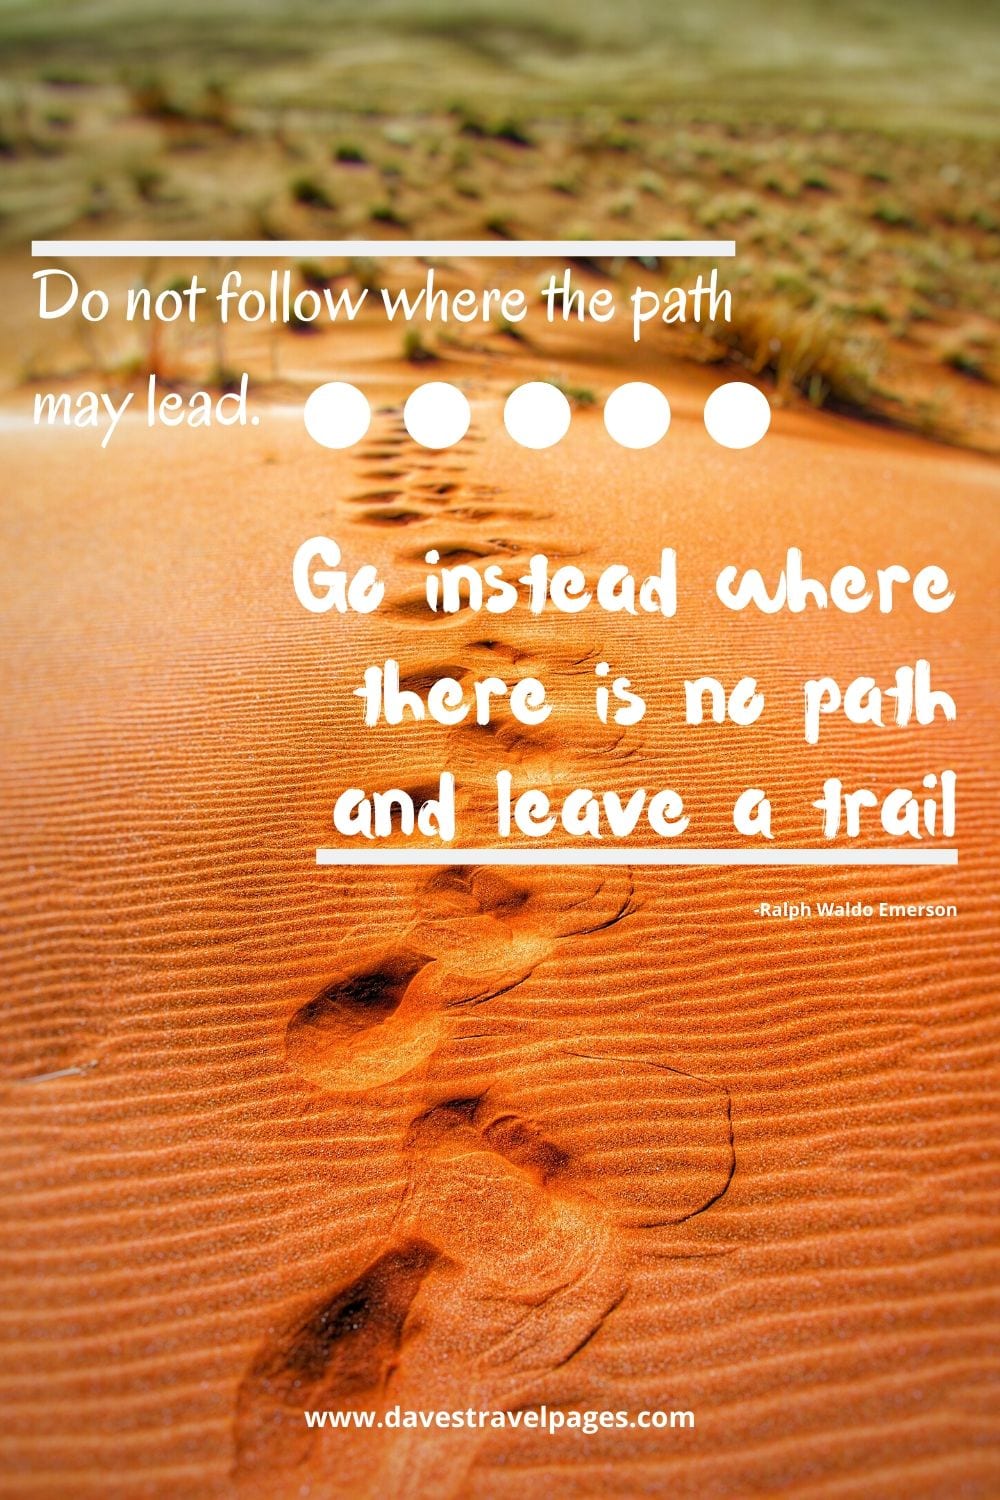 Famous Quote: Do not follow where the path may lead. Go instead where there is no path and leave a trail” -Ralph Waldo Emerson